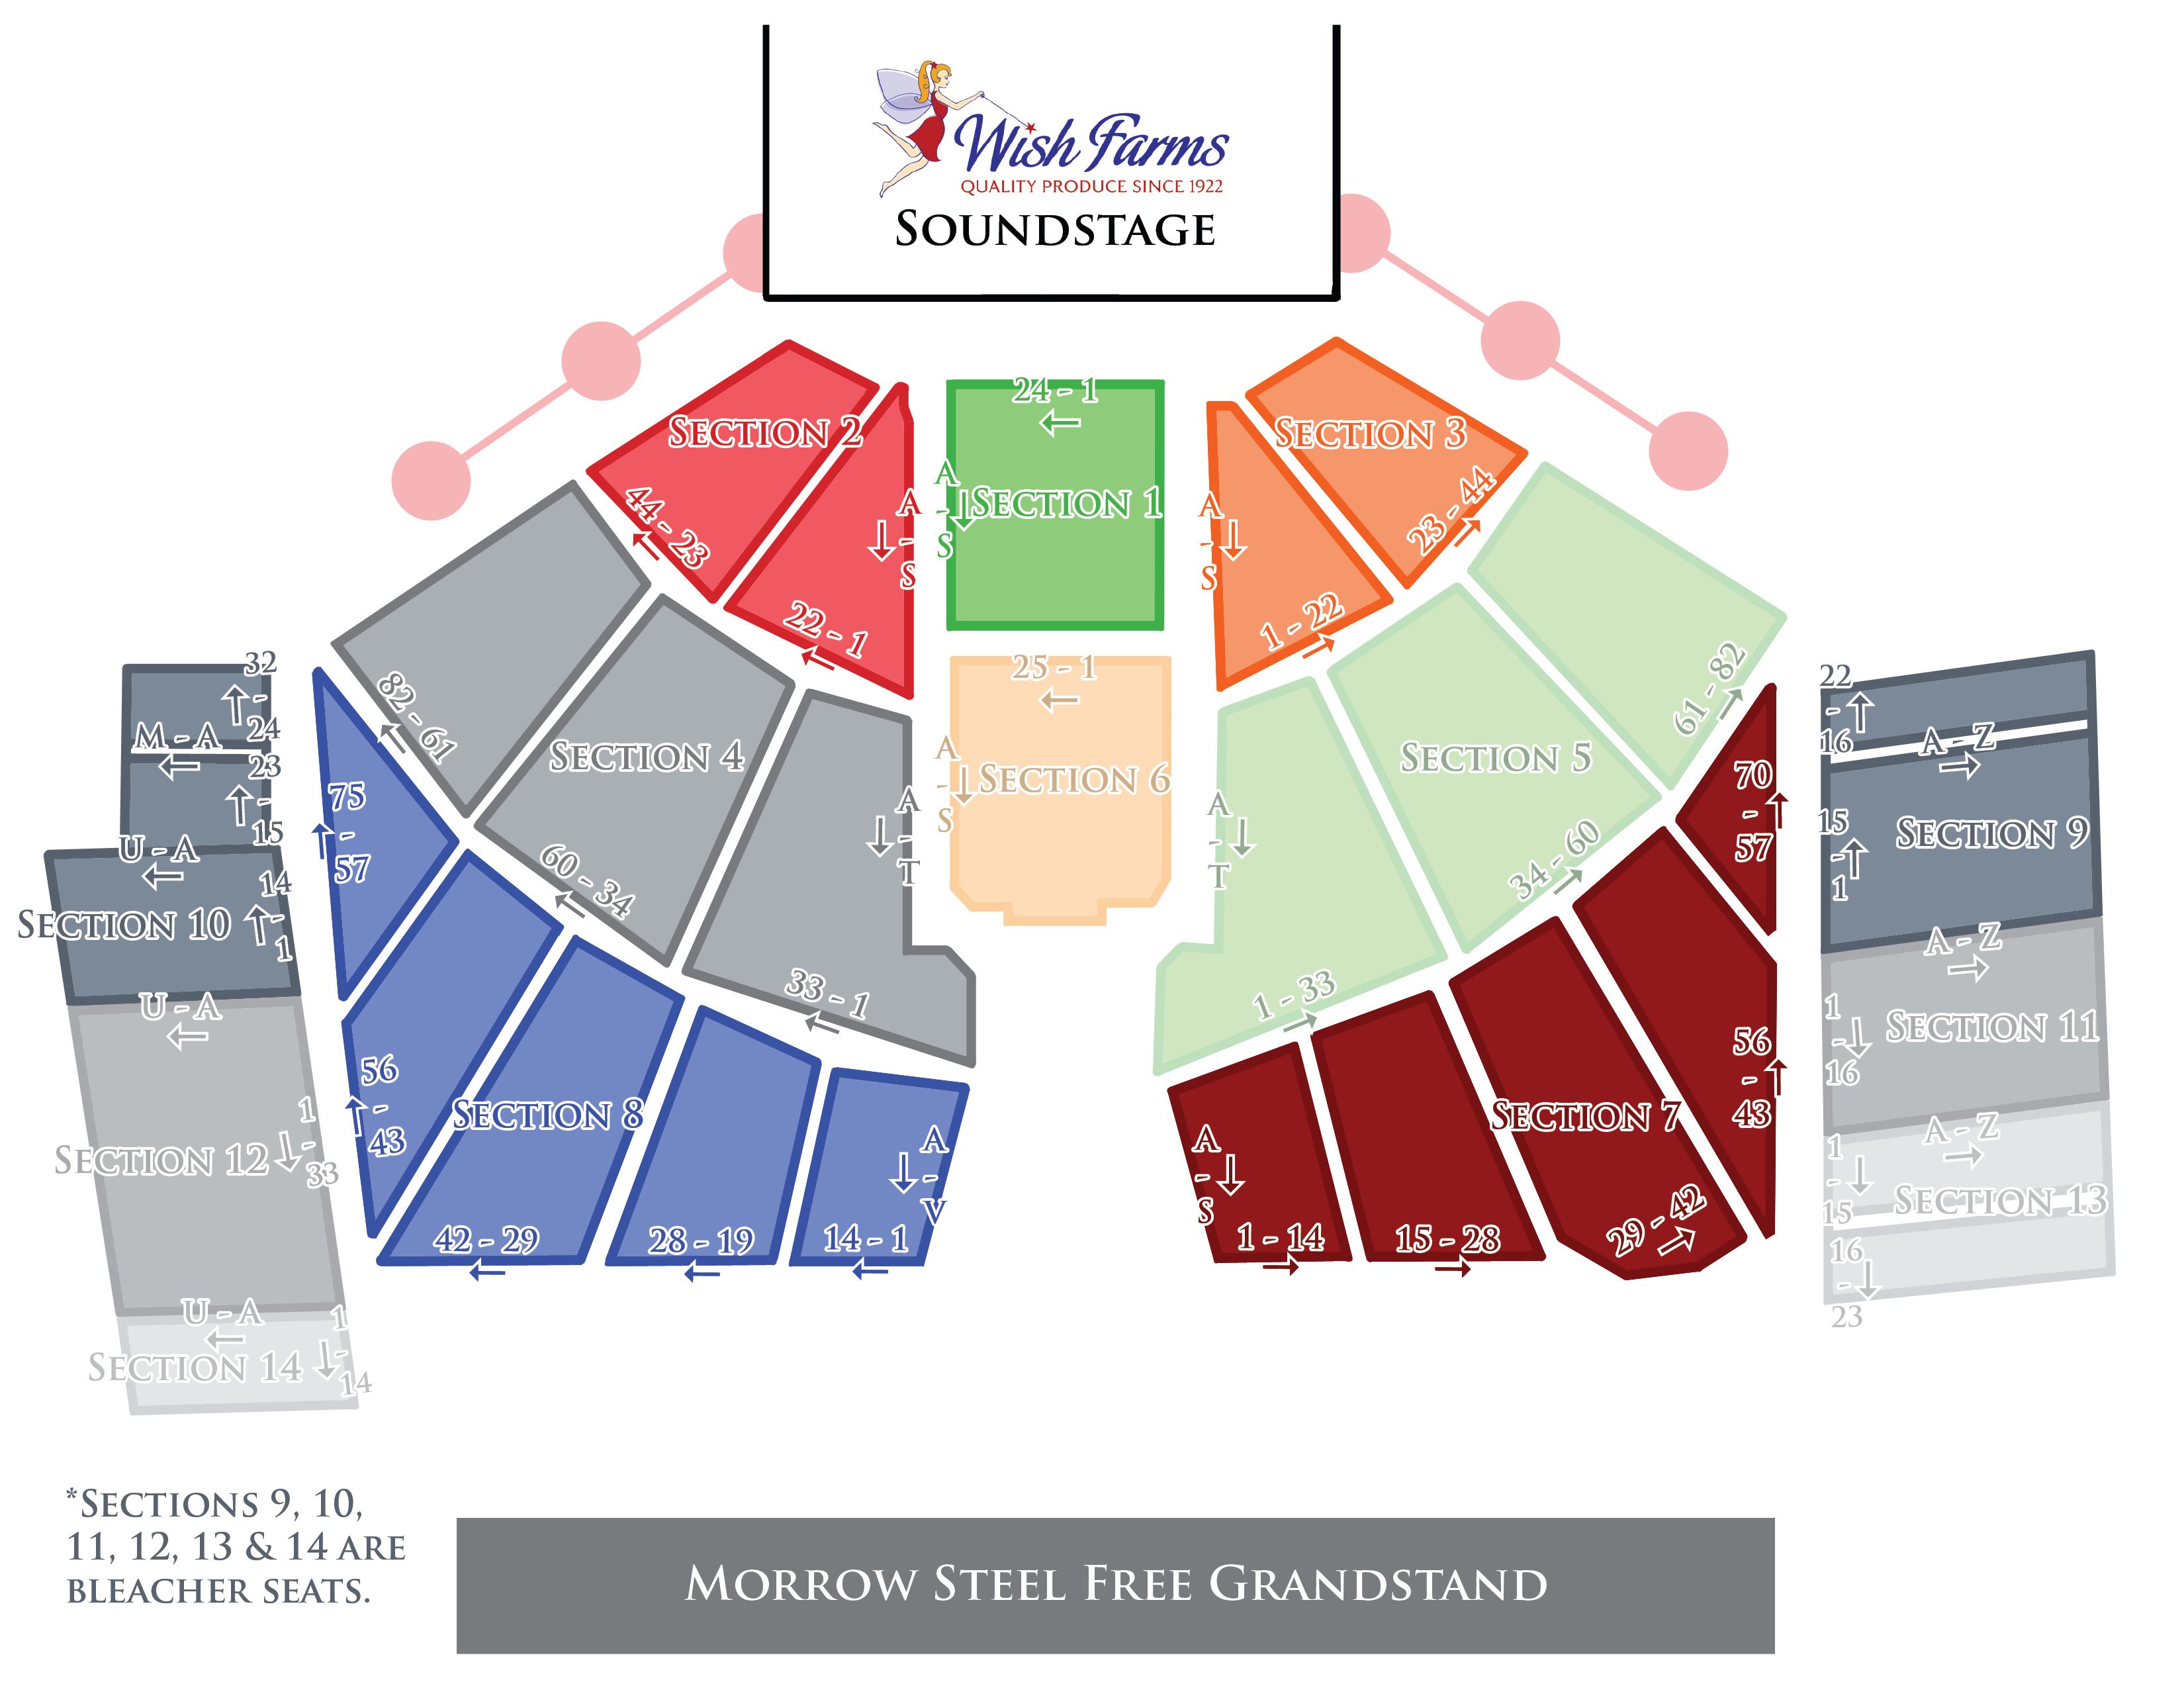 Plant City Strawberry Festival Concert Seating Chart